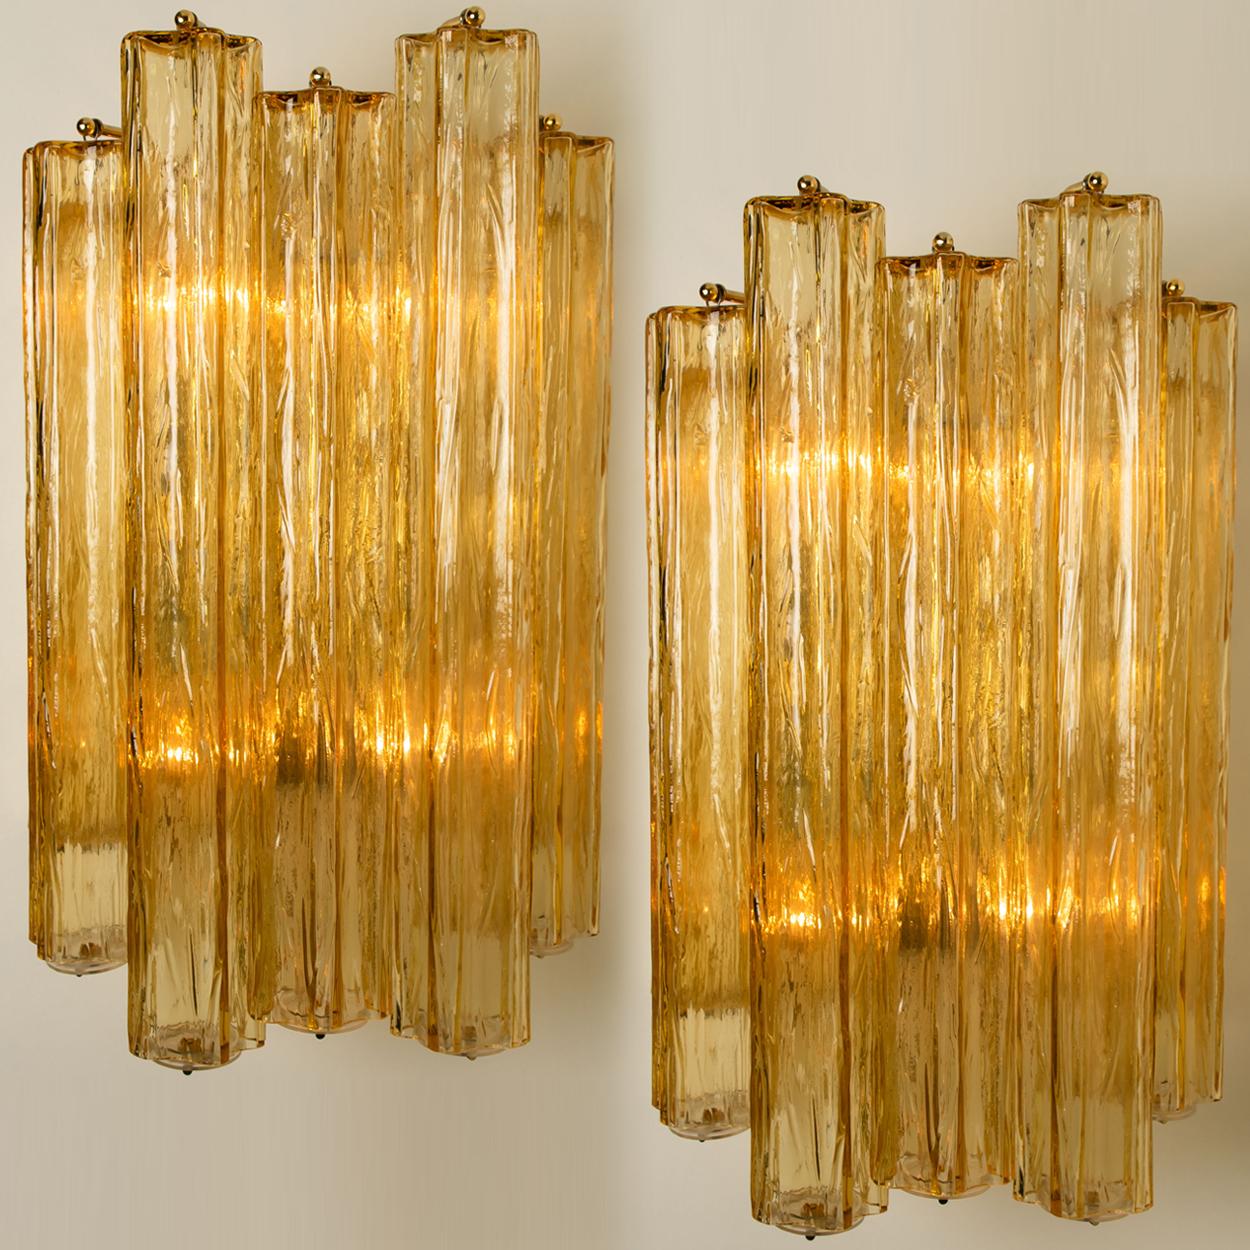 1 of the 3 Extra Large Wall Sconces or Wall Lights Murano Glass, Barovier & Toso 1